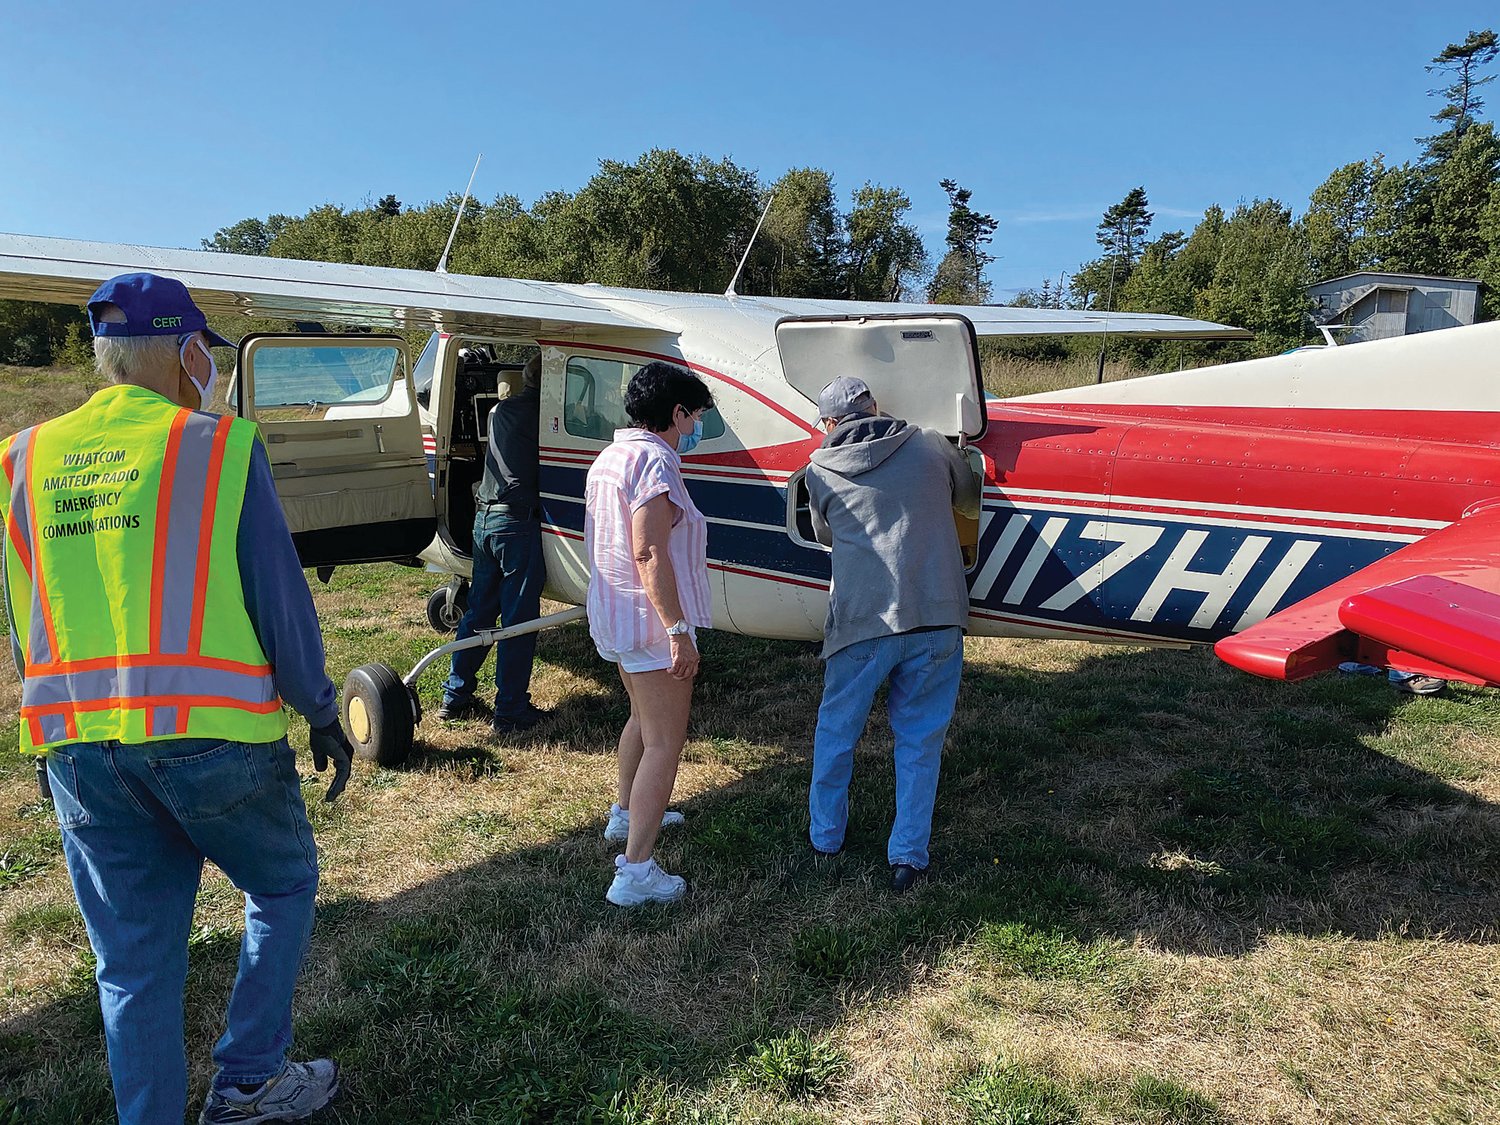 On September 20, the Emergency Volunteer Air Corp flew two planes to Point Roberts as a test run in the event that Point Roberts ever needed emergency supplies during a disaster. They brought in 400 lbs of food for PREP and the Food Bank whose volunteers greeted and offloaded the planes.